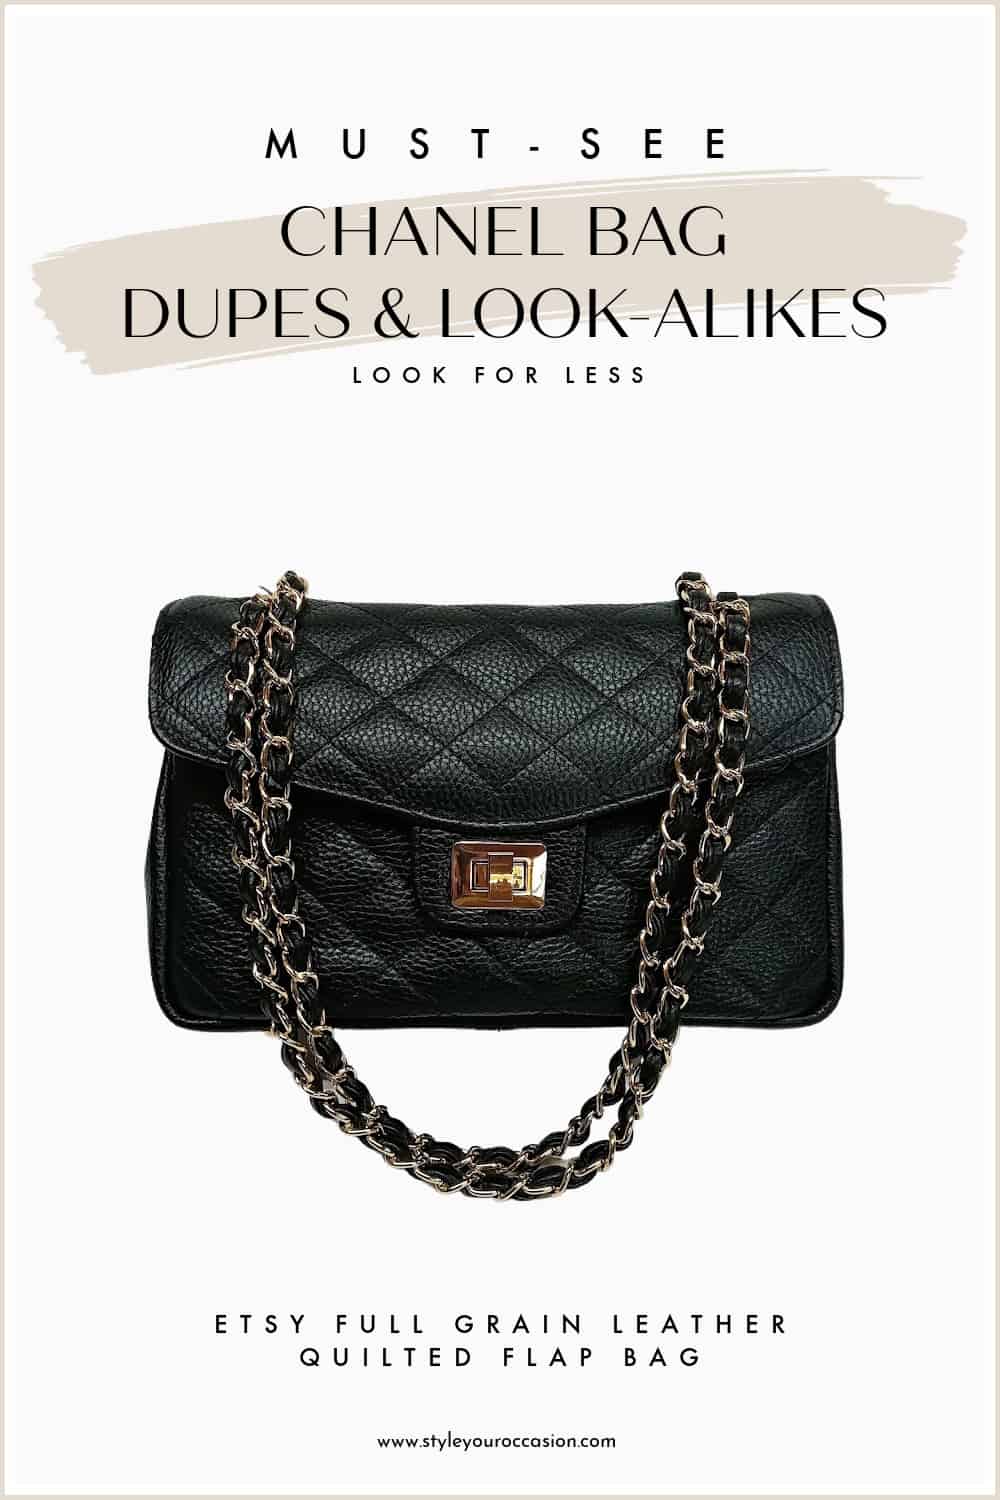 An image of a quilted Chanel bag dupe from Etsy